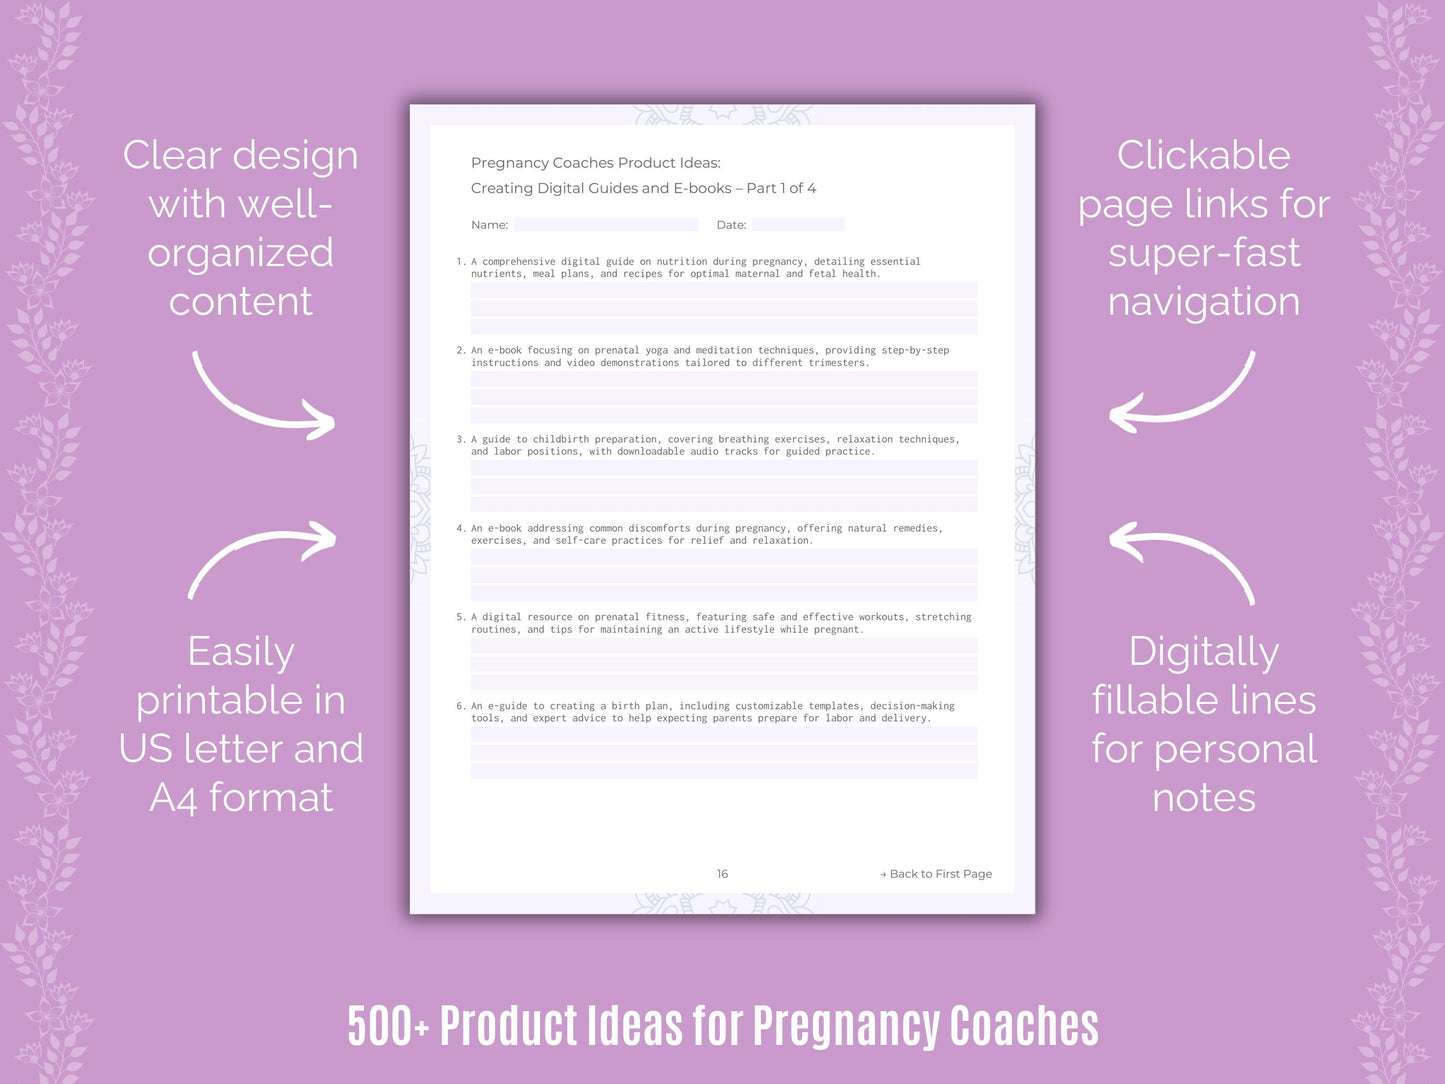 Pregnancy Coaches Business Resource